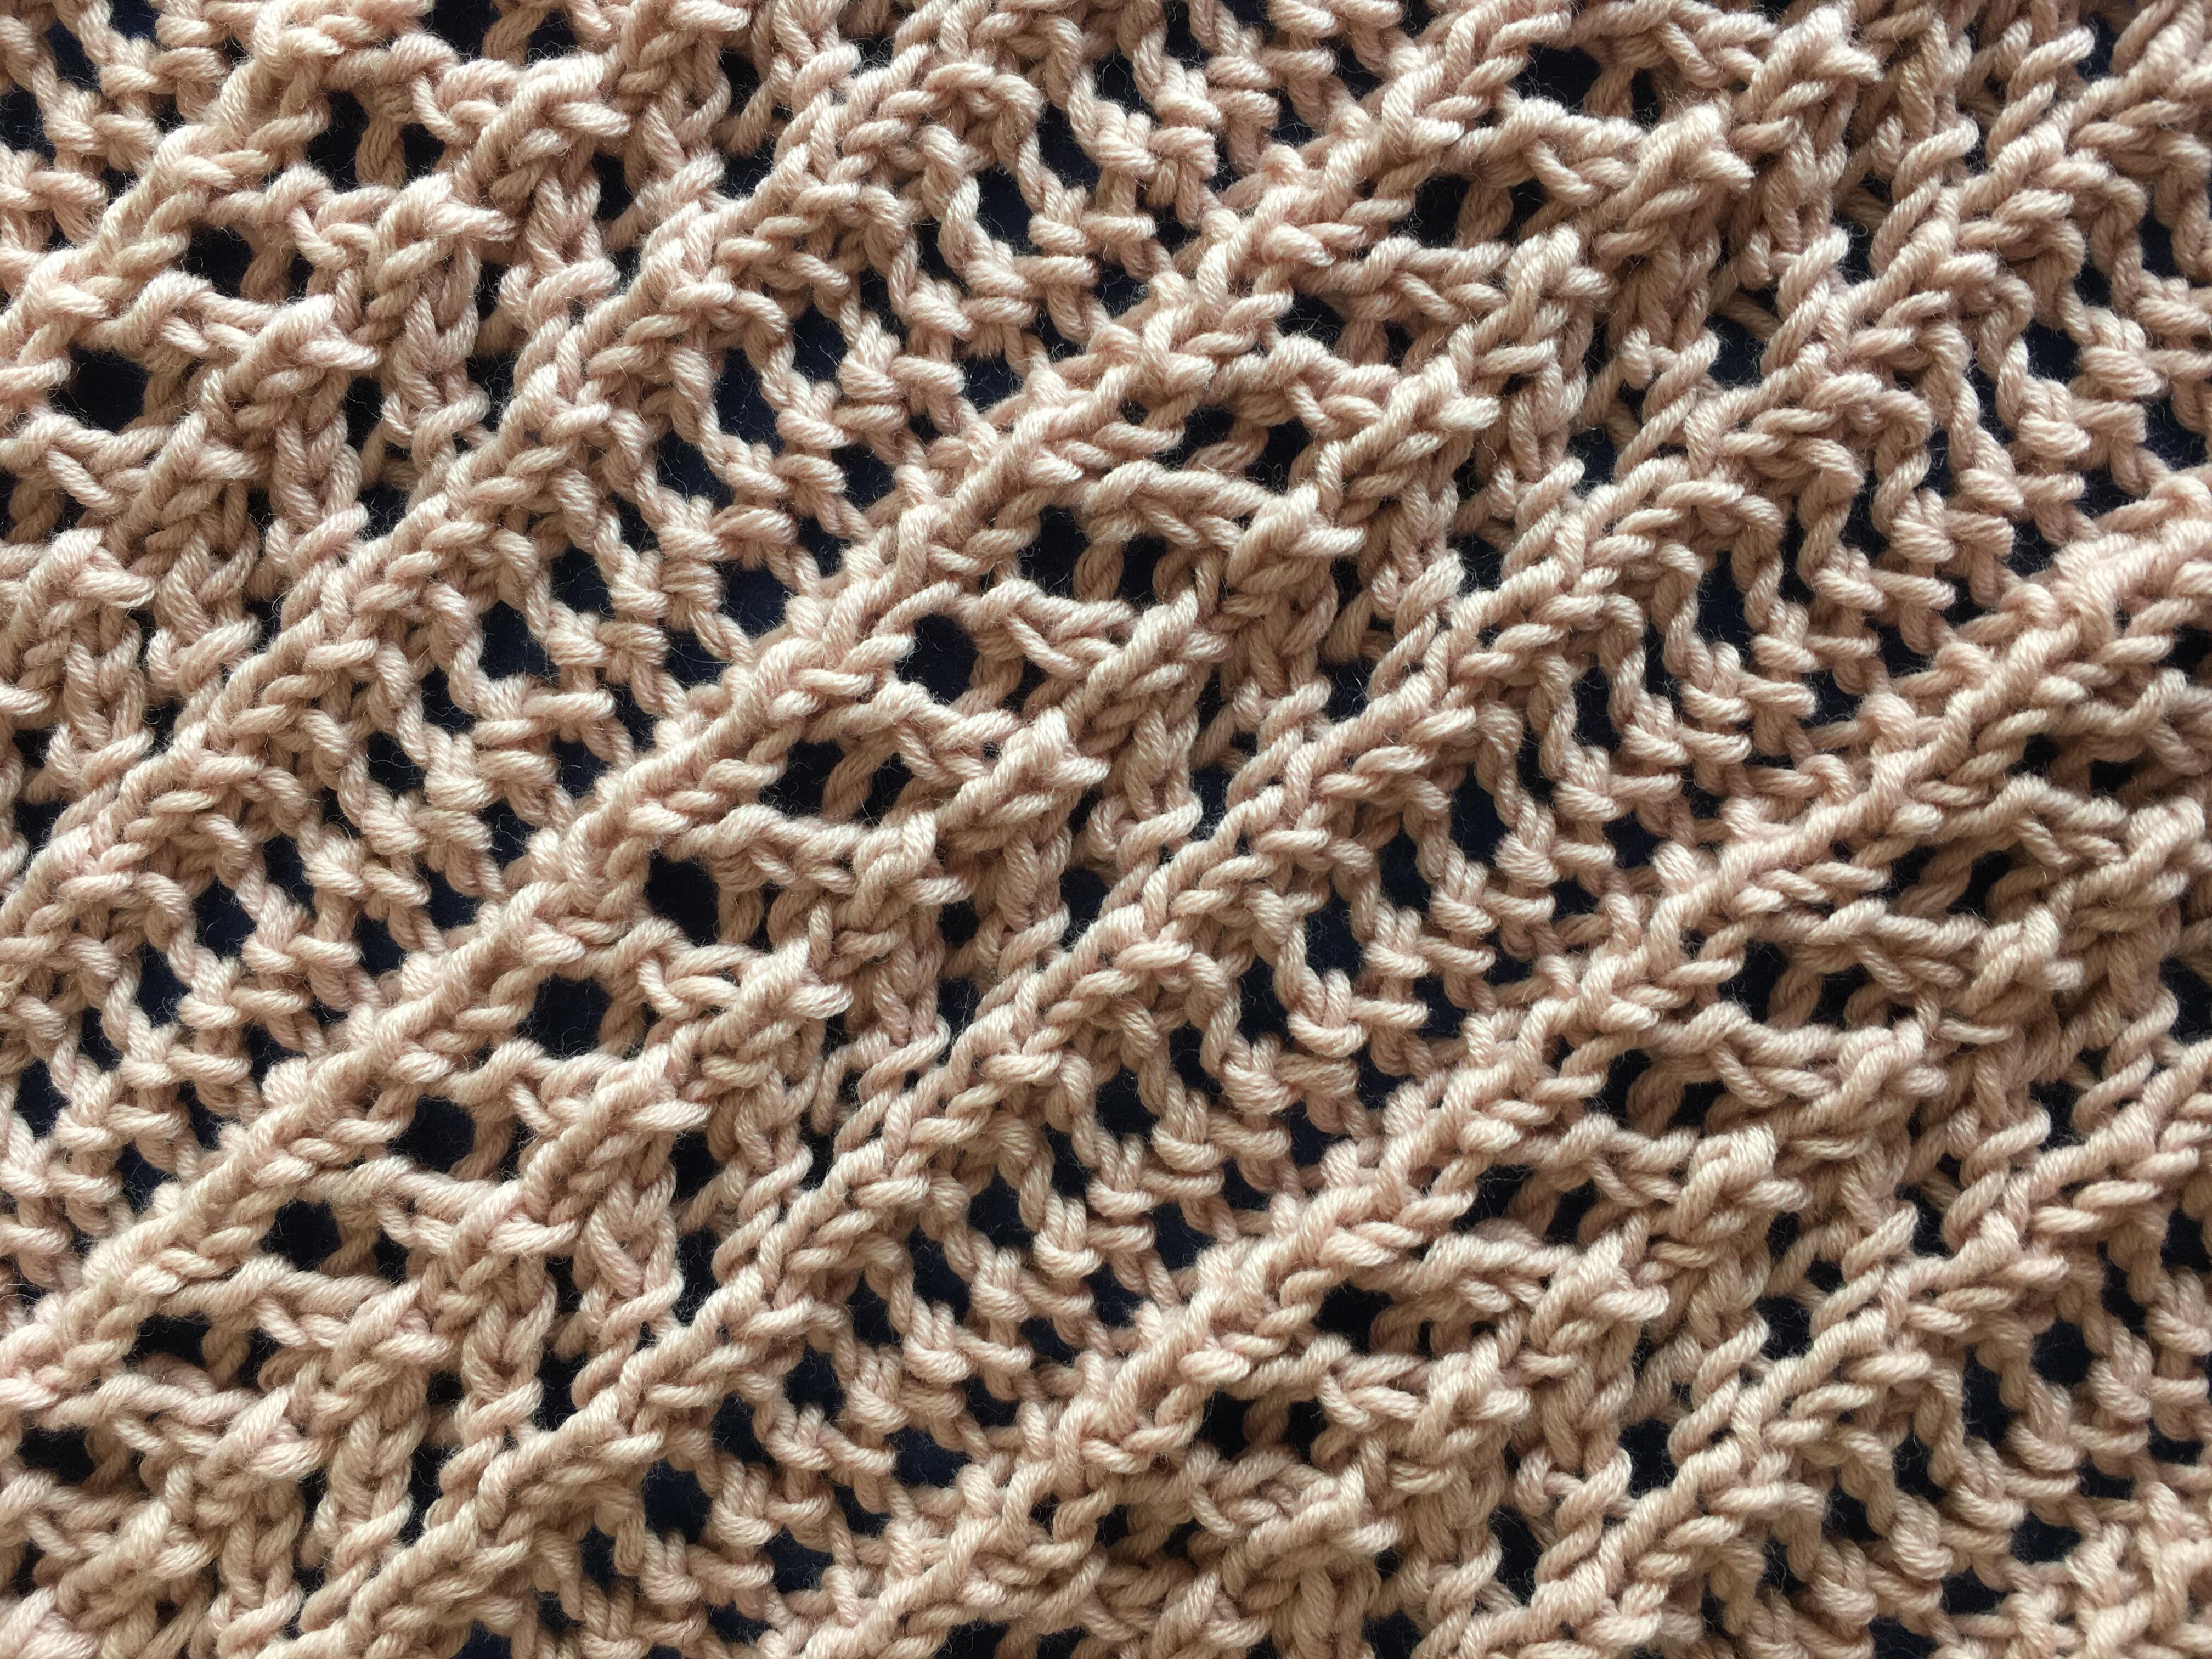 close up of lace pattern in knit shawl